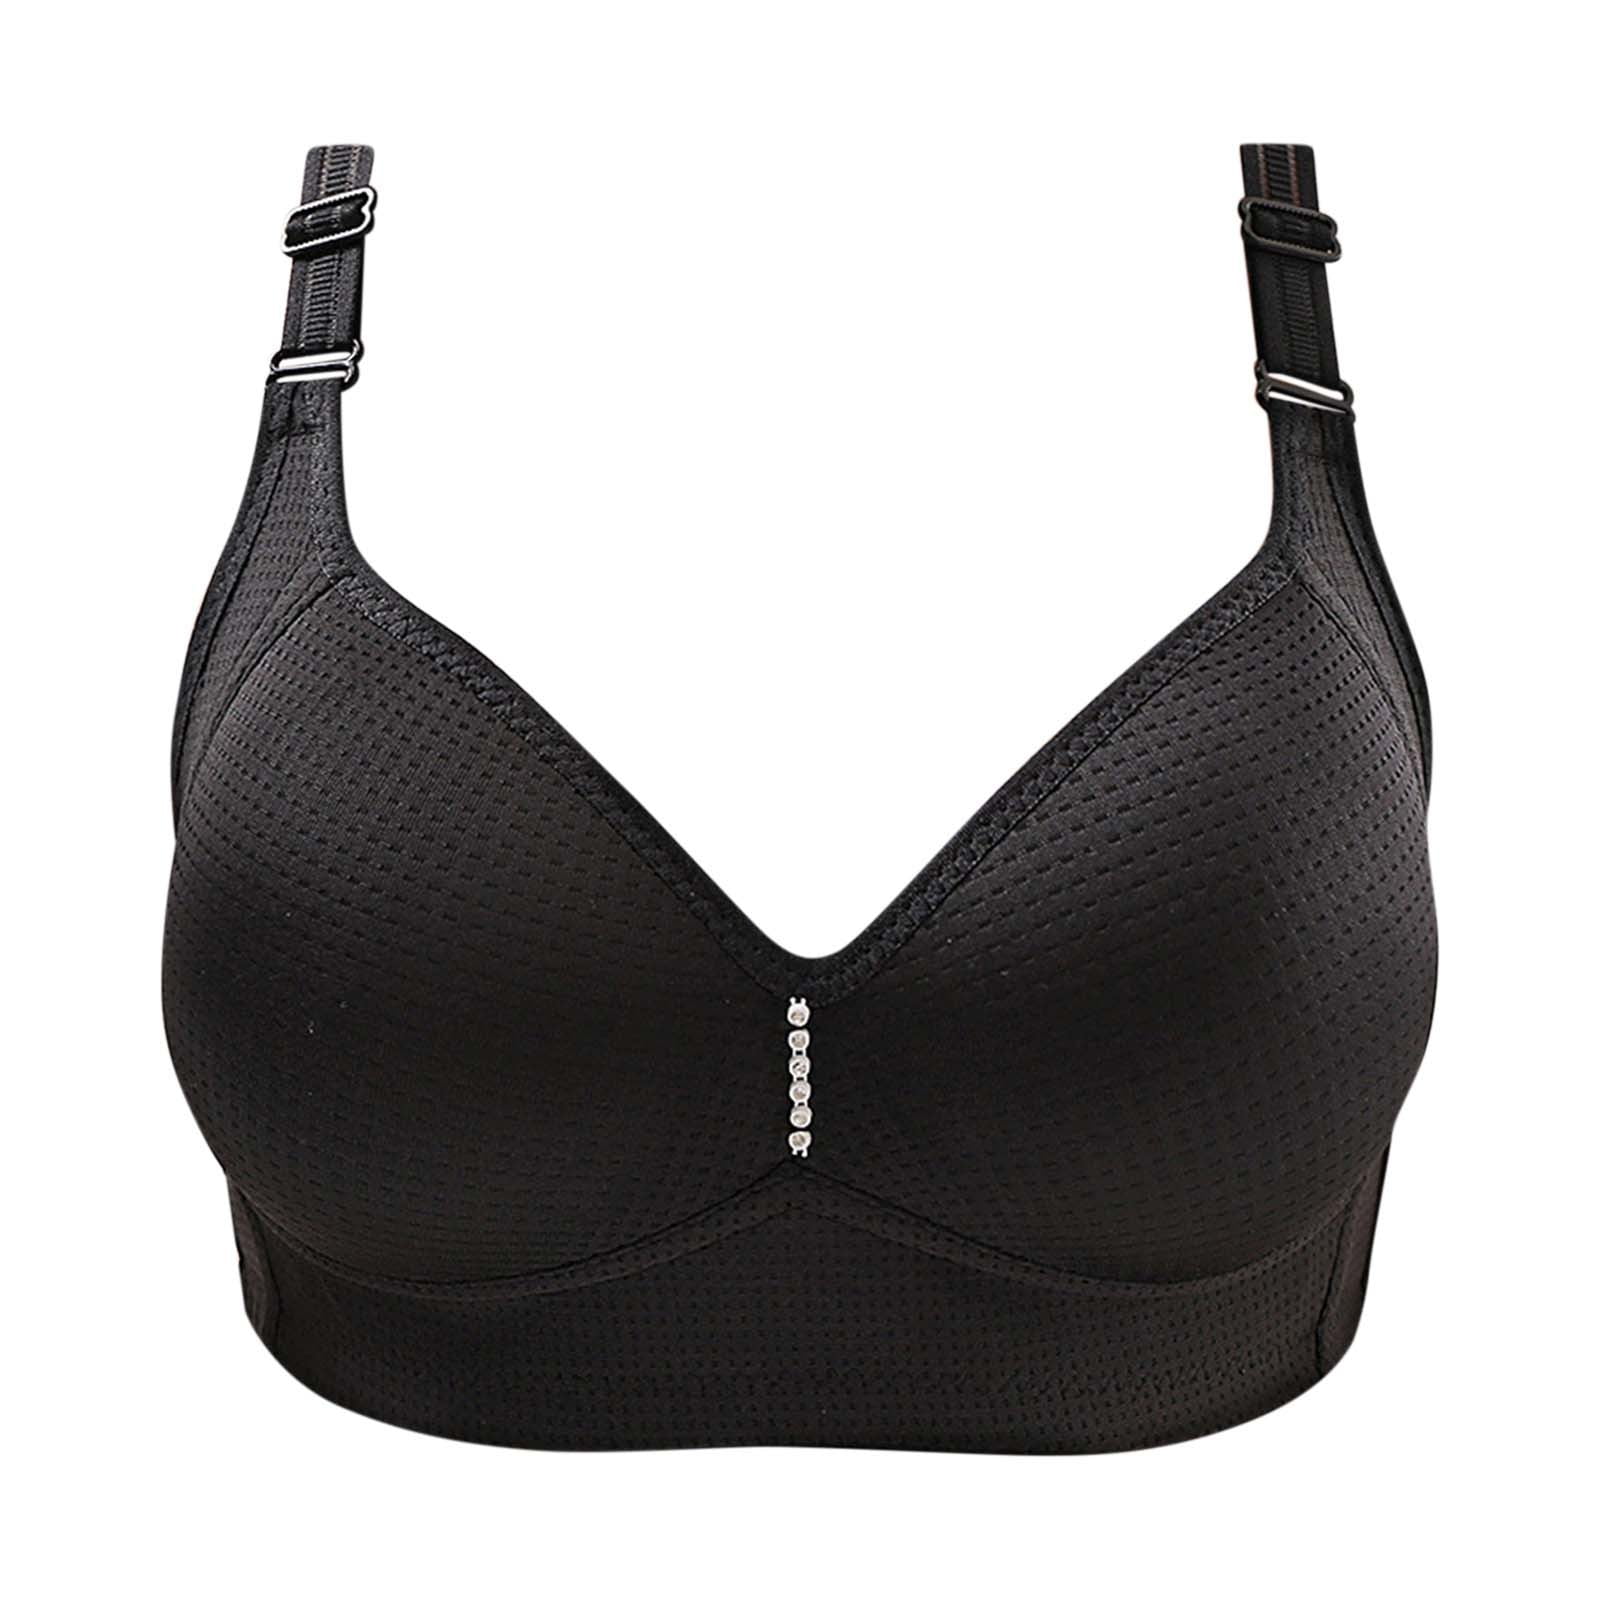 Women's Bra Front Closure 5D Shaping Seamless Push Up Lace Bras For Women